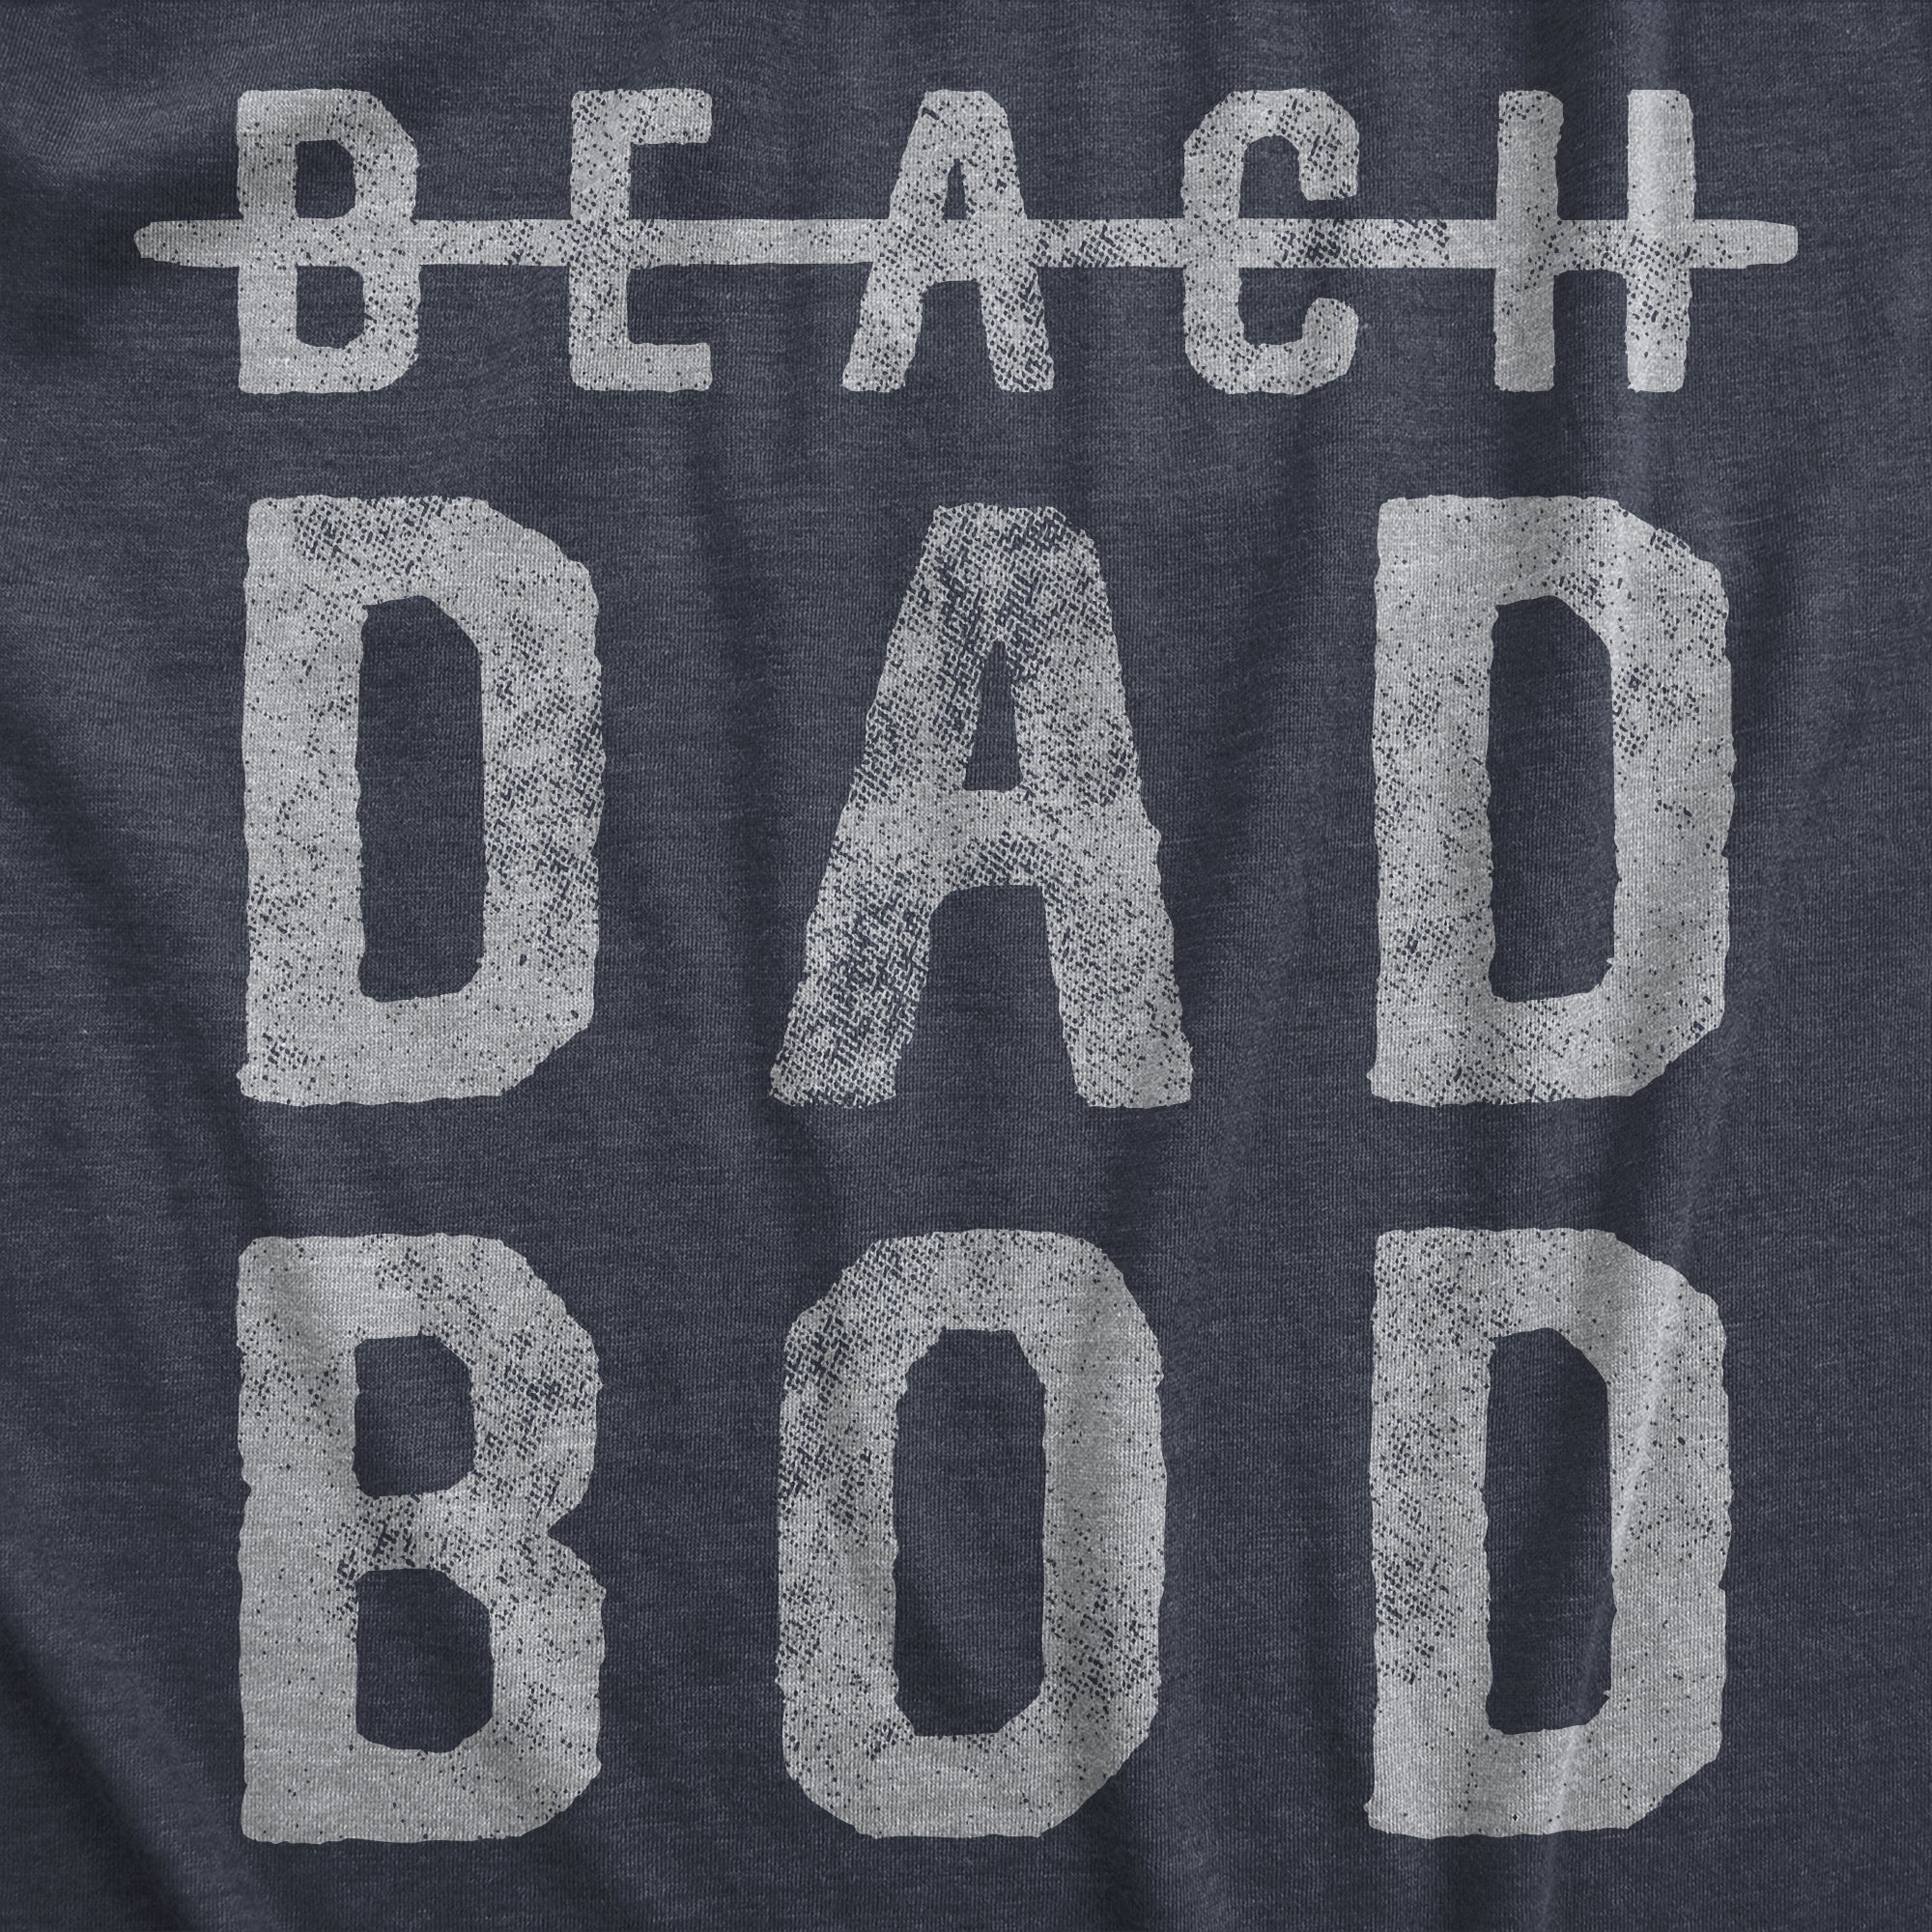 Funny Heather Navy Beach Dad Bod Mens T Shirt Nerdy Father's Day fitness fitness Tee